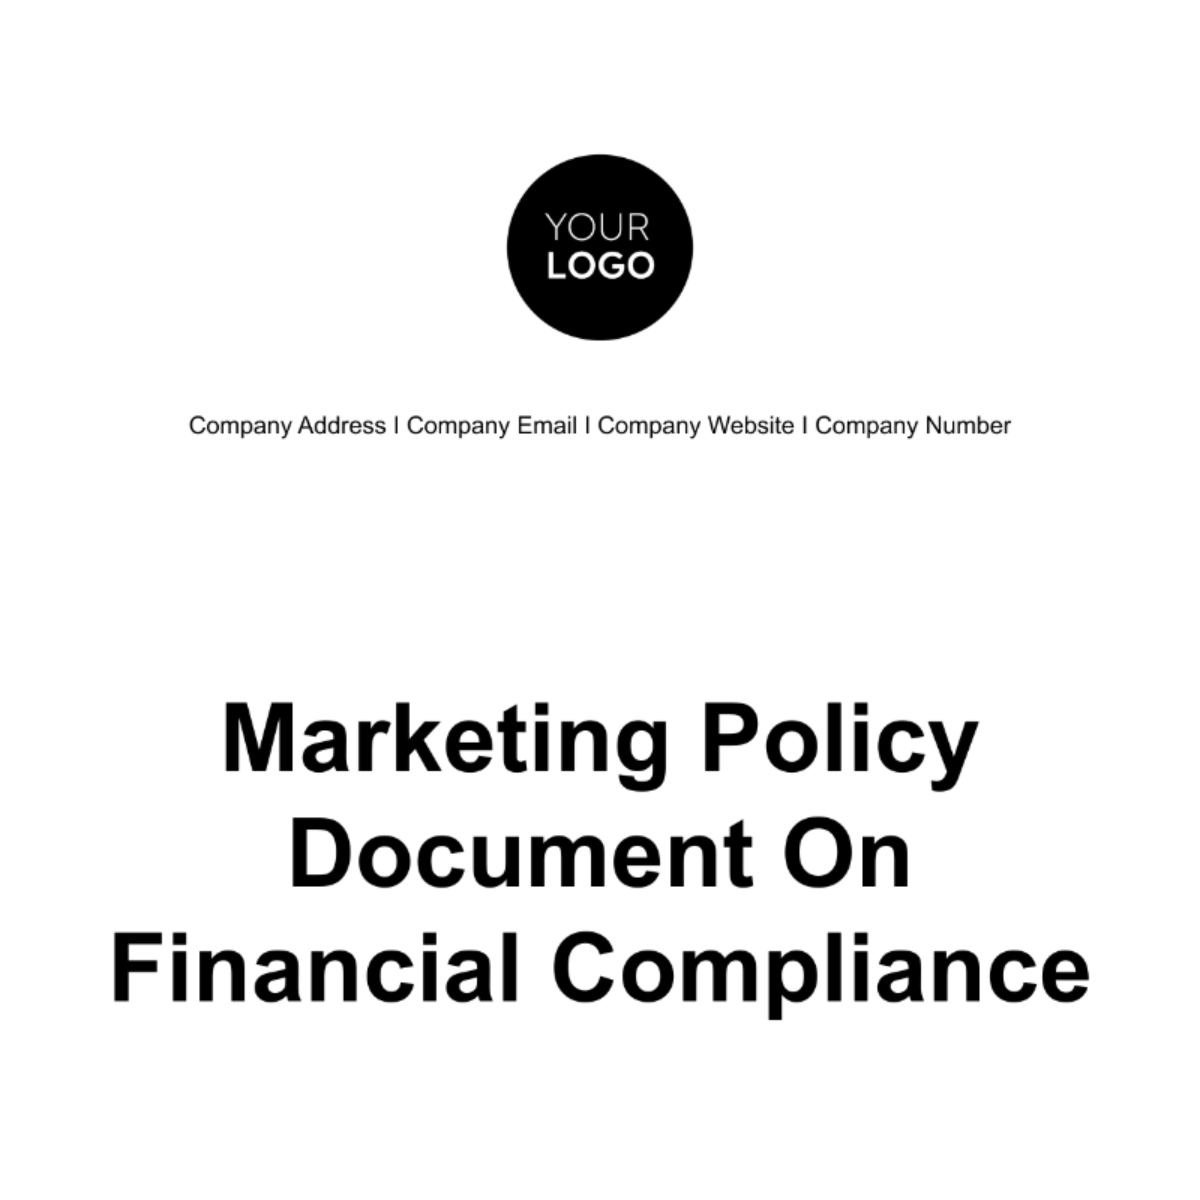 Free Marketing Policy Document on Financial Compliance Template